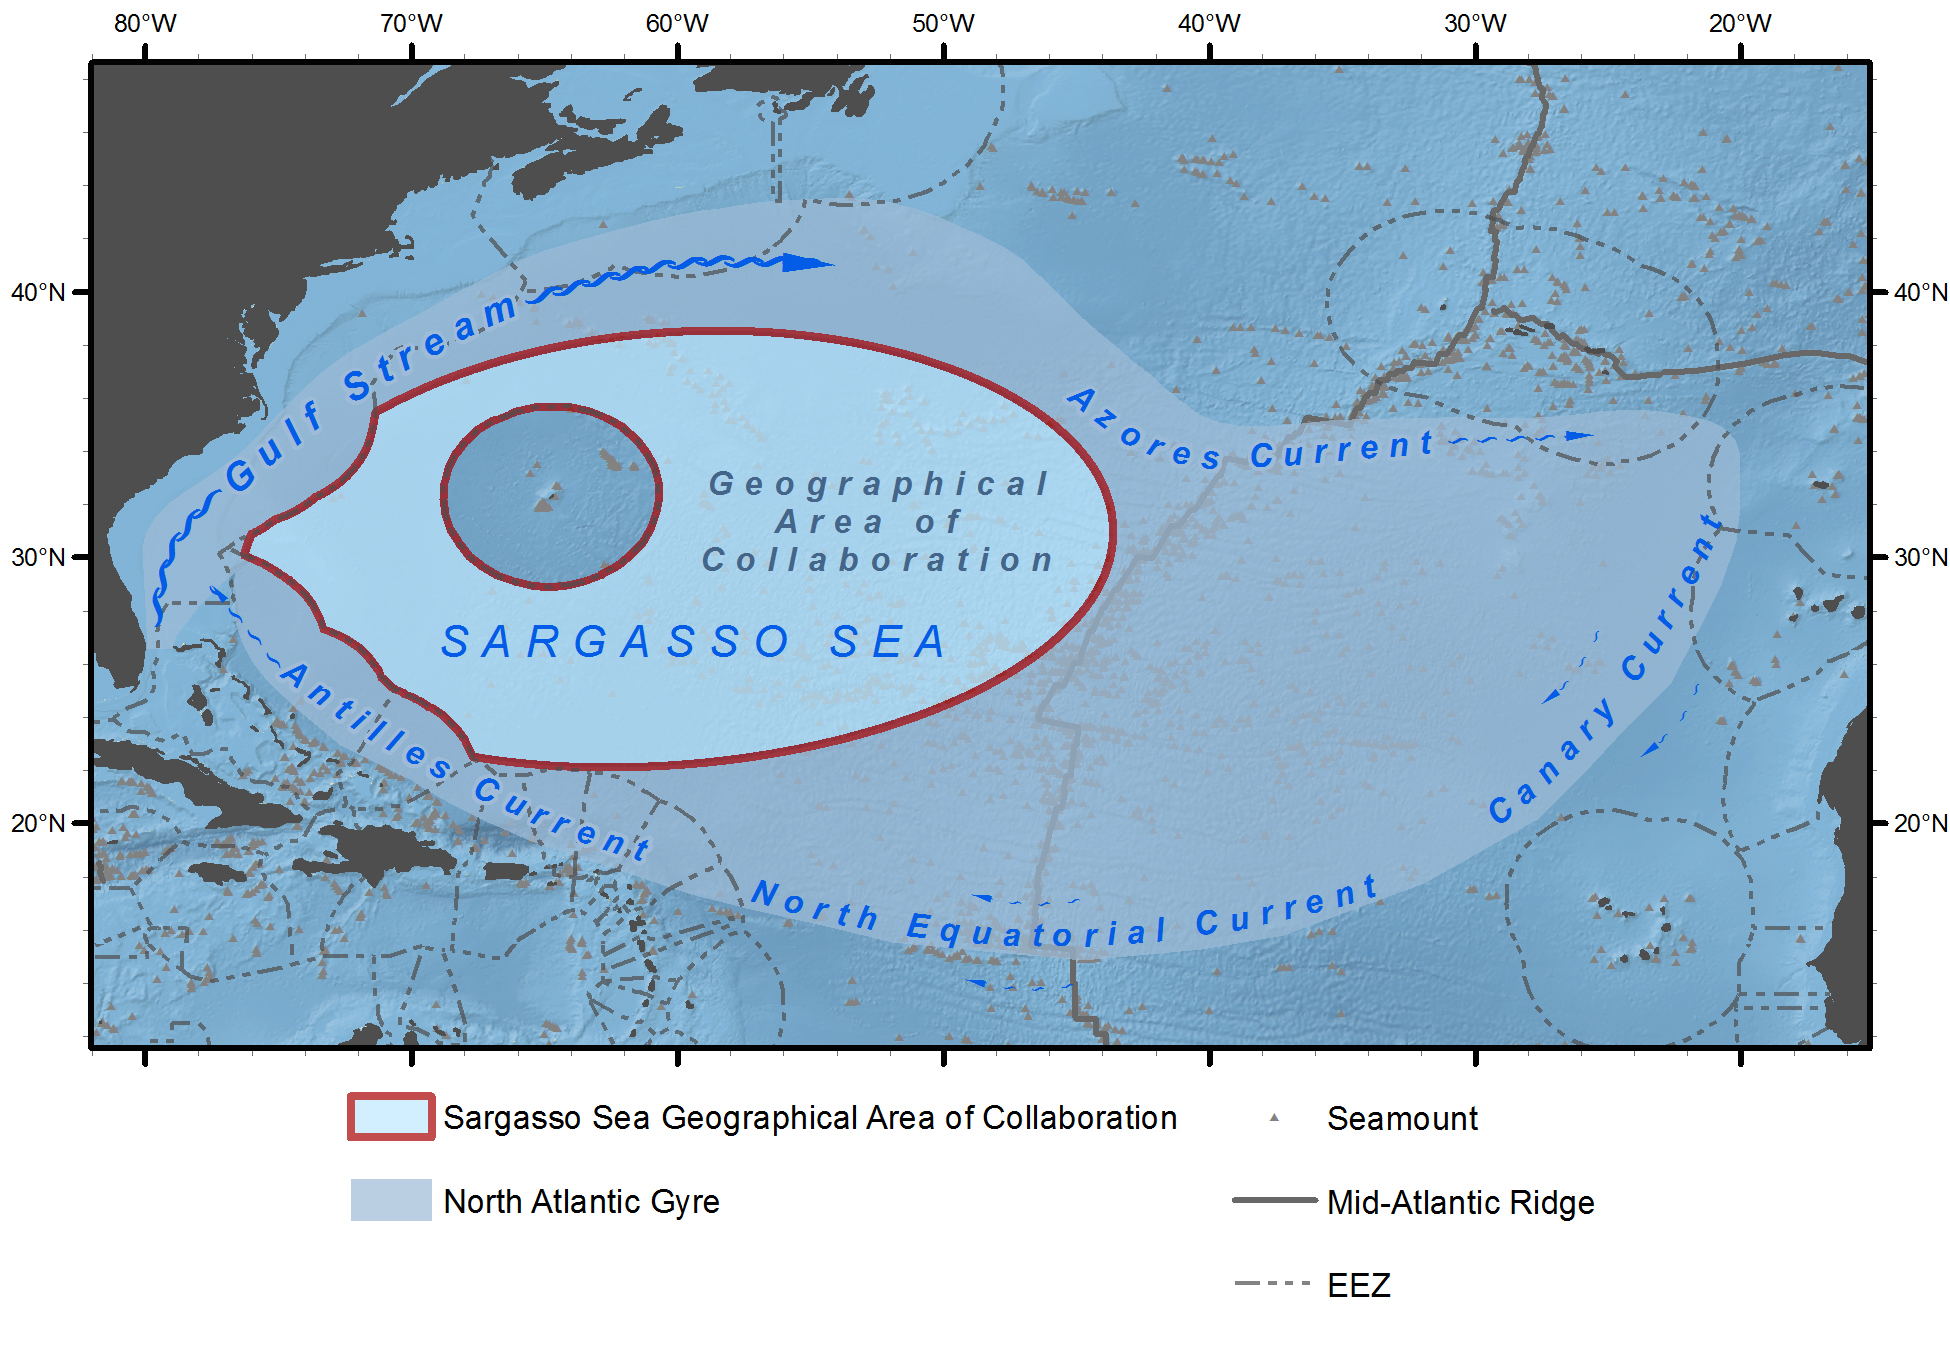 The Sargasso Sea in the Atlantic Ocean, is shown around the islands of Bermuda, with text within its boundaries reading "Geographical Area of Collboration". Currents around the Sargasso Sea and the wider North Atlantic Gyre are labelled clockwise from left to right" Gulf Stream, Azores Current, Canary Current, North Equatorial Current, Antilles Current.